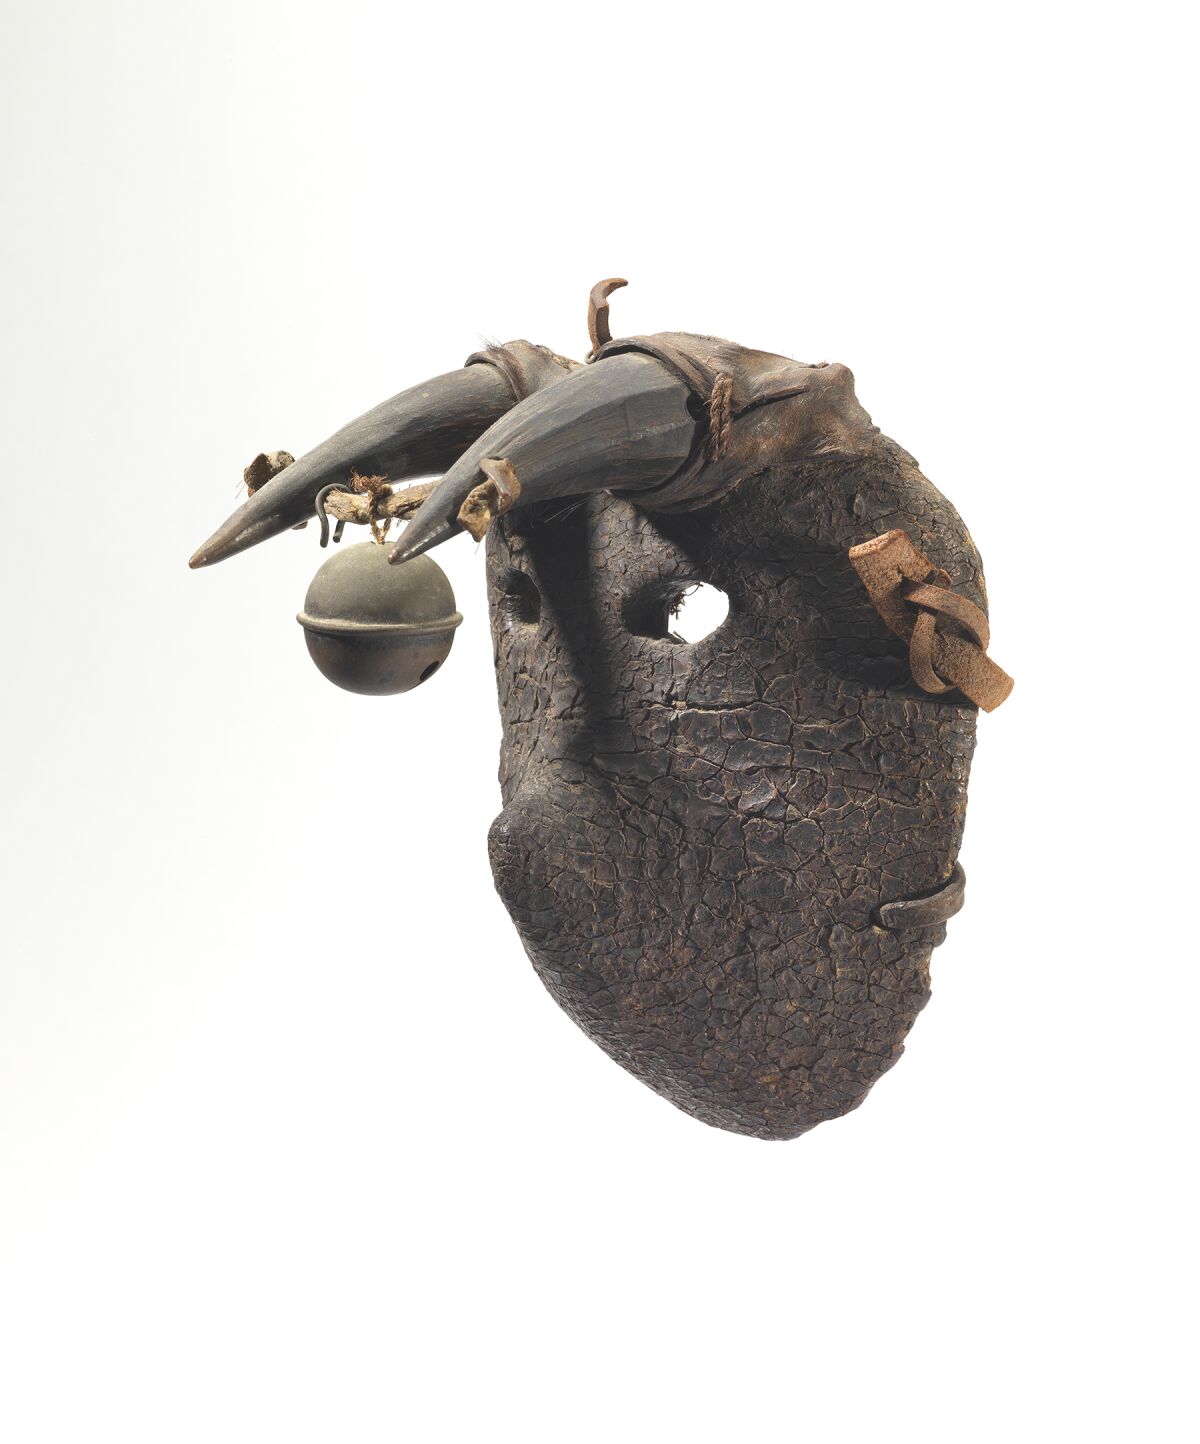 A Guatemalan bull mask crafted at some point in the late 19th or early 20th century, on view at the Fowler Museum.